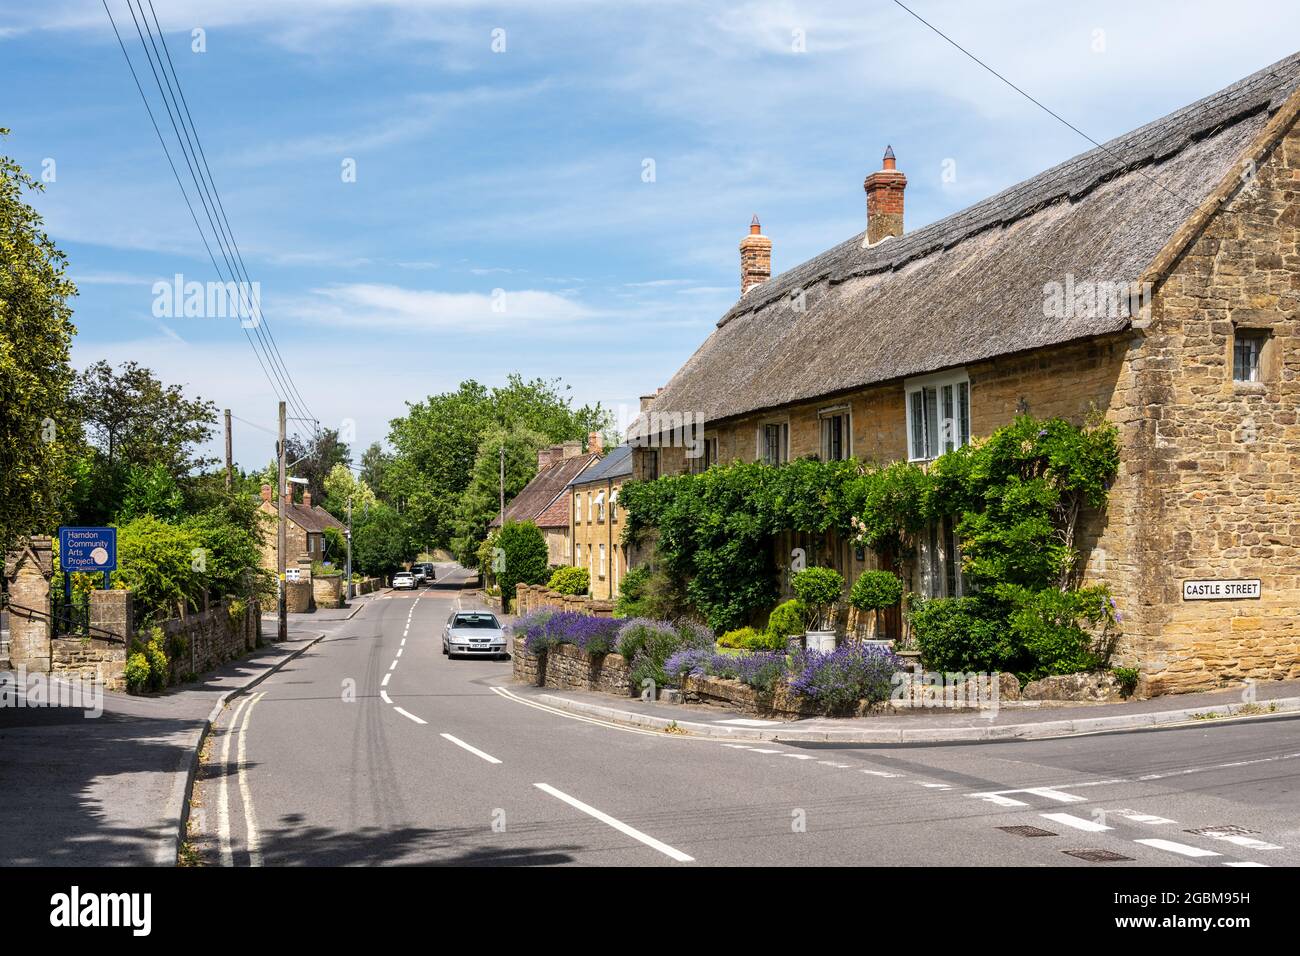 Traditional cottages line a street in Stoke-sub-Hamdon, Somerset. Stock Photo